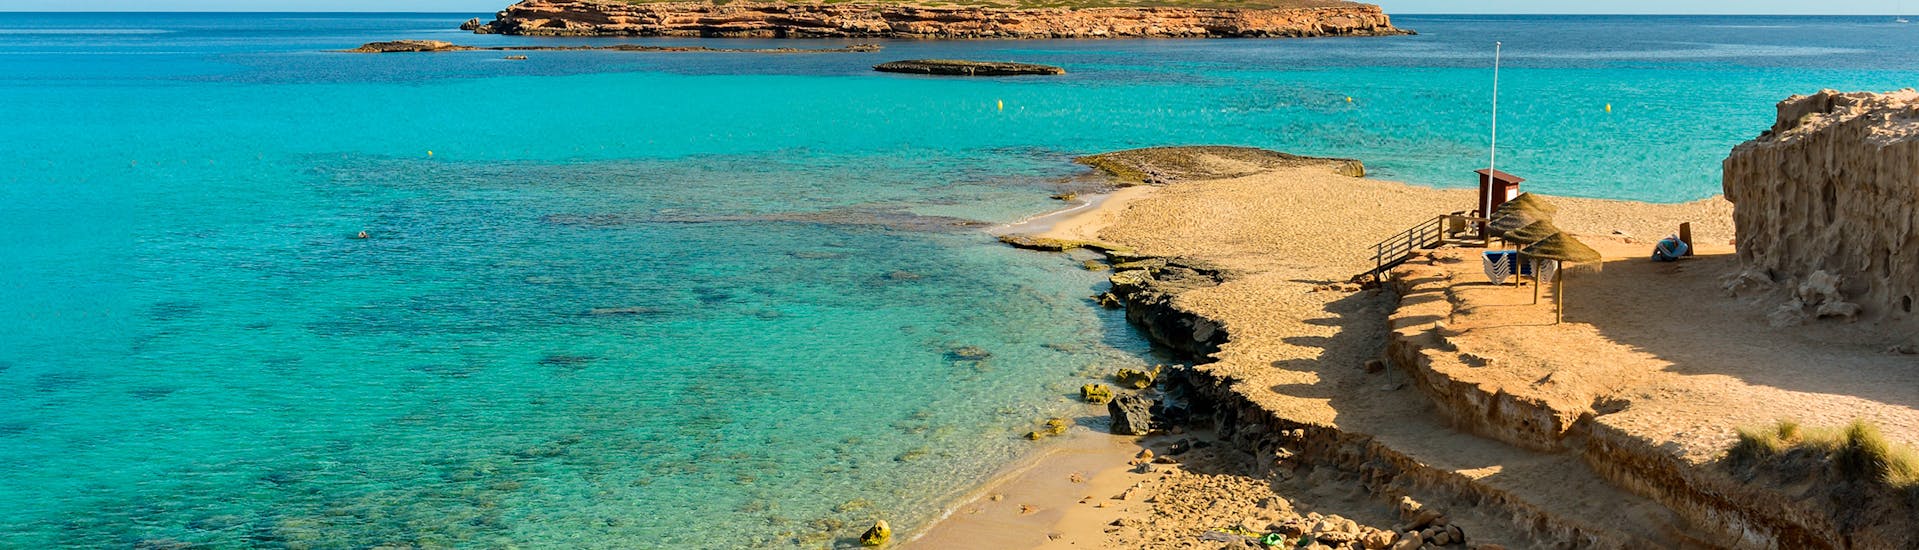 The beach where you will be able to swim during the Glass-Bottom Catamaran Trip to Cala Salada with Swimming & Snorkeling with Capitan Nemo Ibiza.